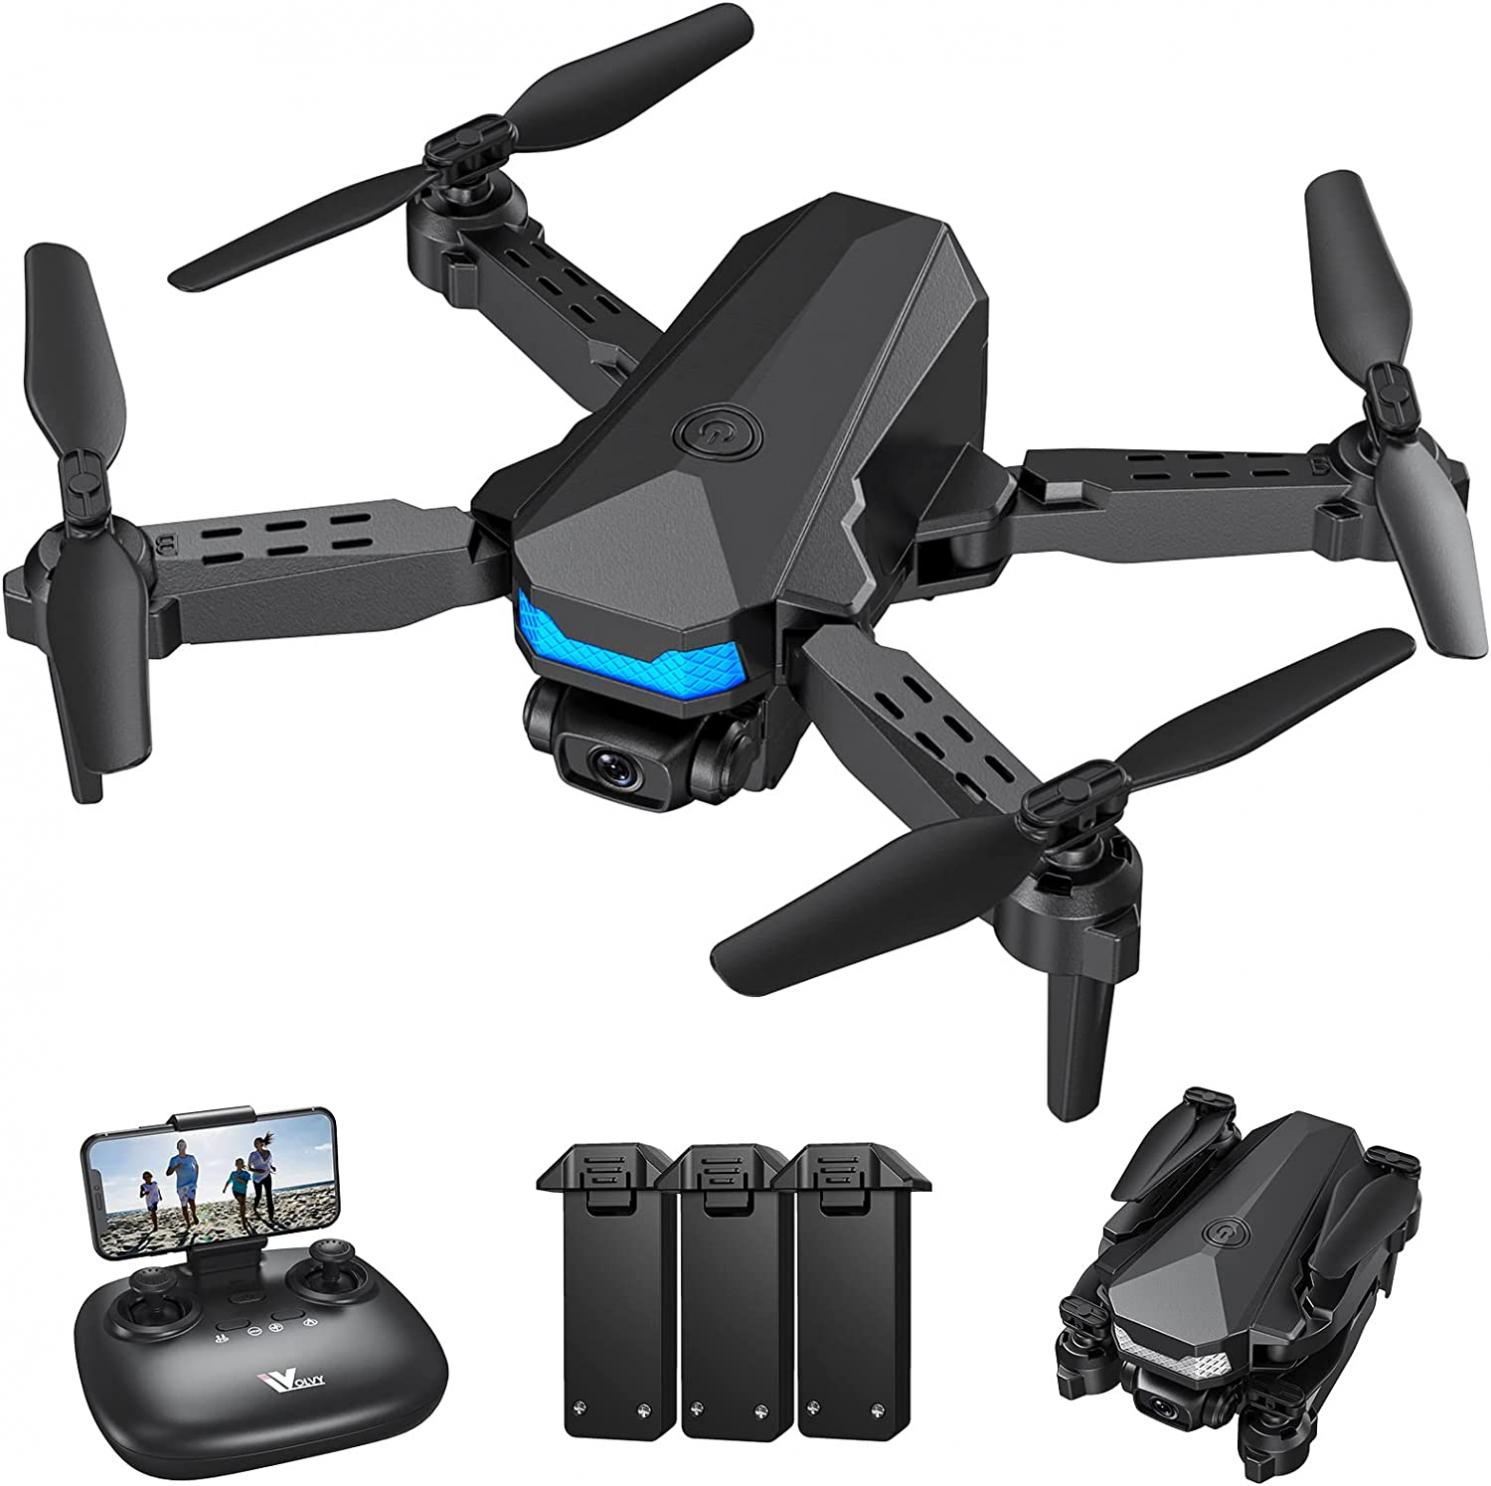 ATTOP Mini Drone with Camera, 1080P Camera Drone FPV RC Quadcopter w/ Voice & Gesture Control, Altitude Hold, Headless Mode, 3 Speed Modes, 30 Min flight, 3D Flip Drone for Kid Adult Beginner Gift